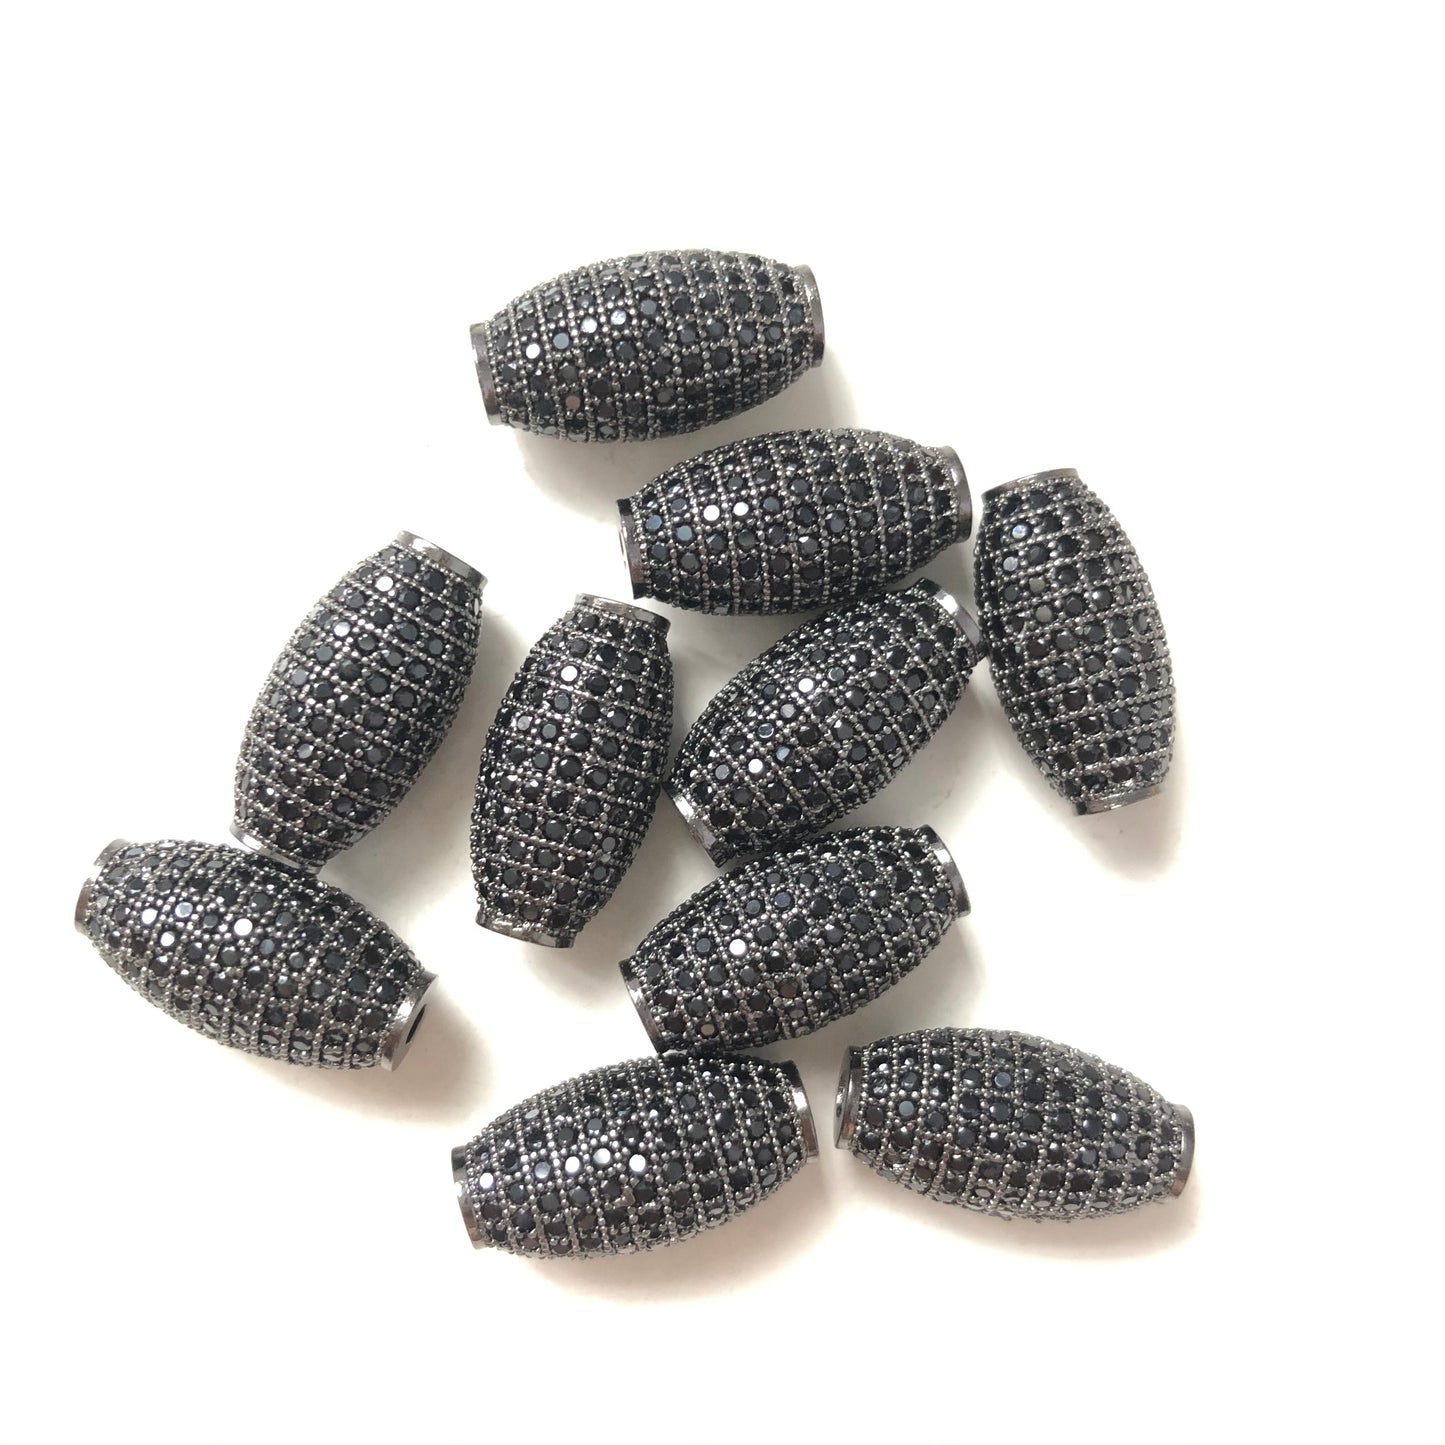 10pcs/lot 20*10mm Clear CZ Paved Oliver Centerpiece Spacers Black on black CZ Paved Spacers Oval Spacers Charms Beads Beyond